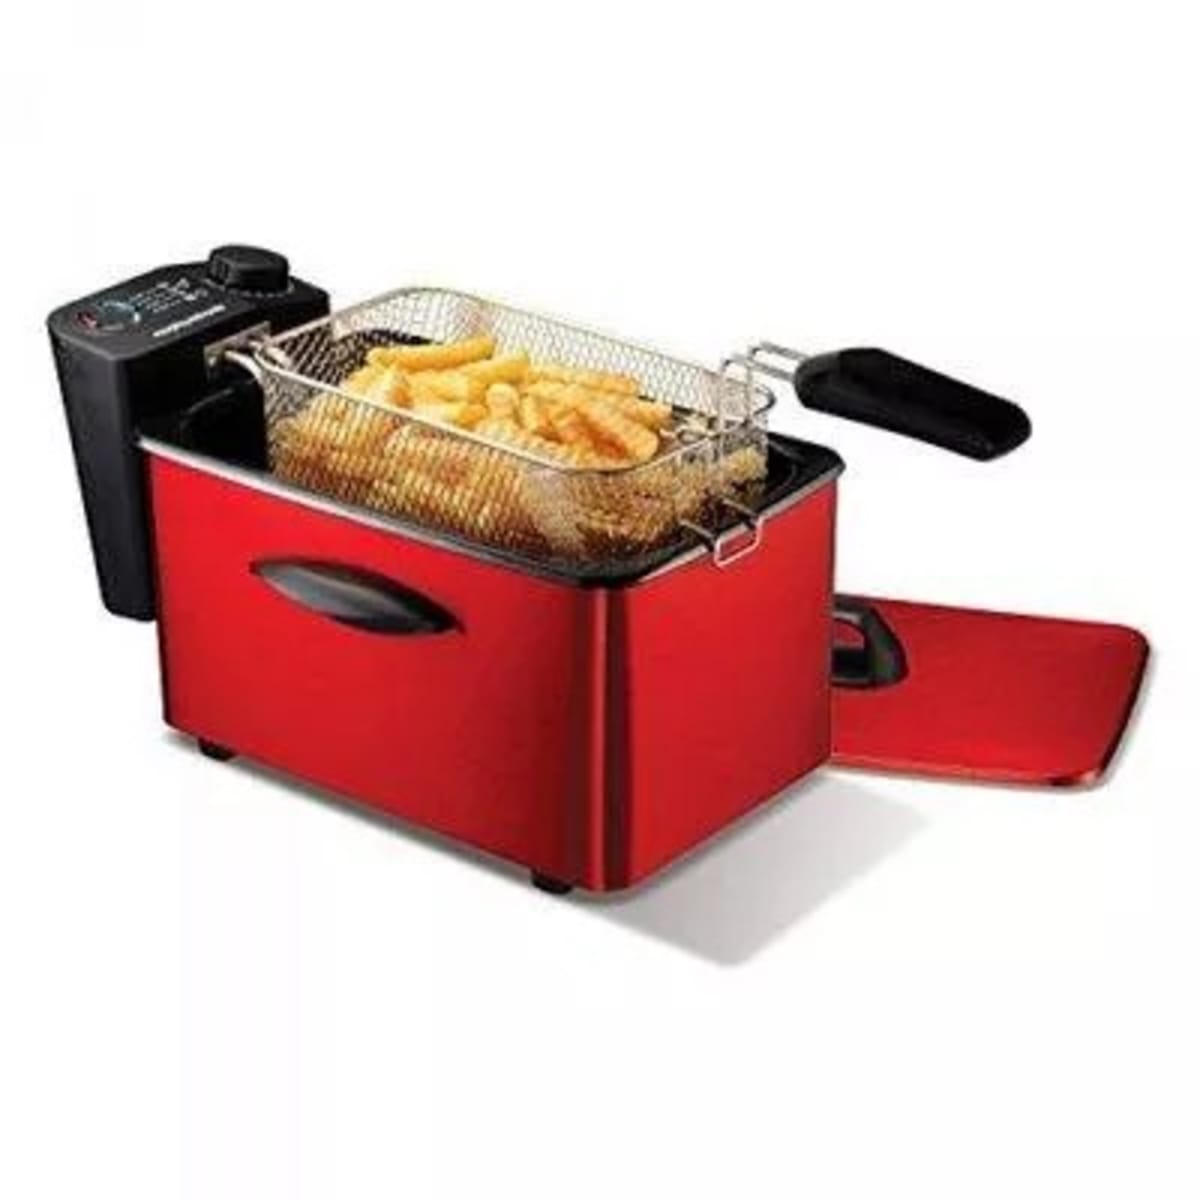 morphy richards 45083 accents deep fryer 220 240 volts, red